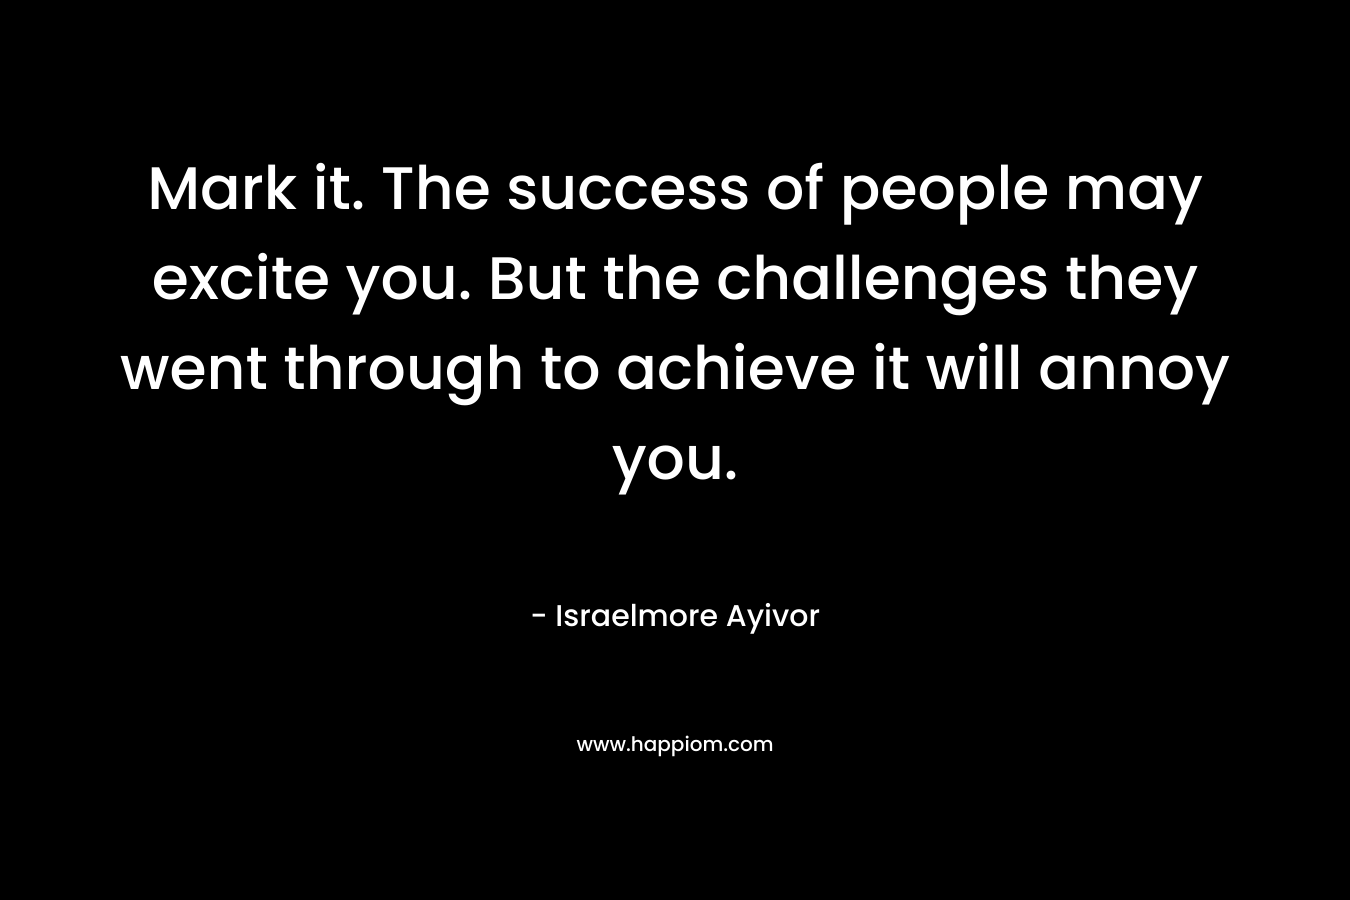 Mark it. The success of people may excite you. But the challenges they went through to achieve it will annoy you.